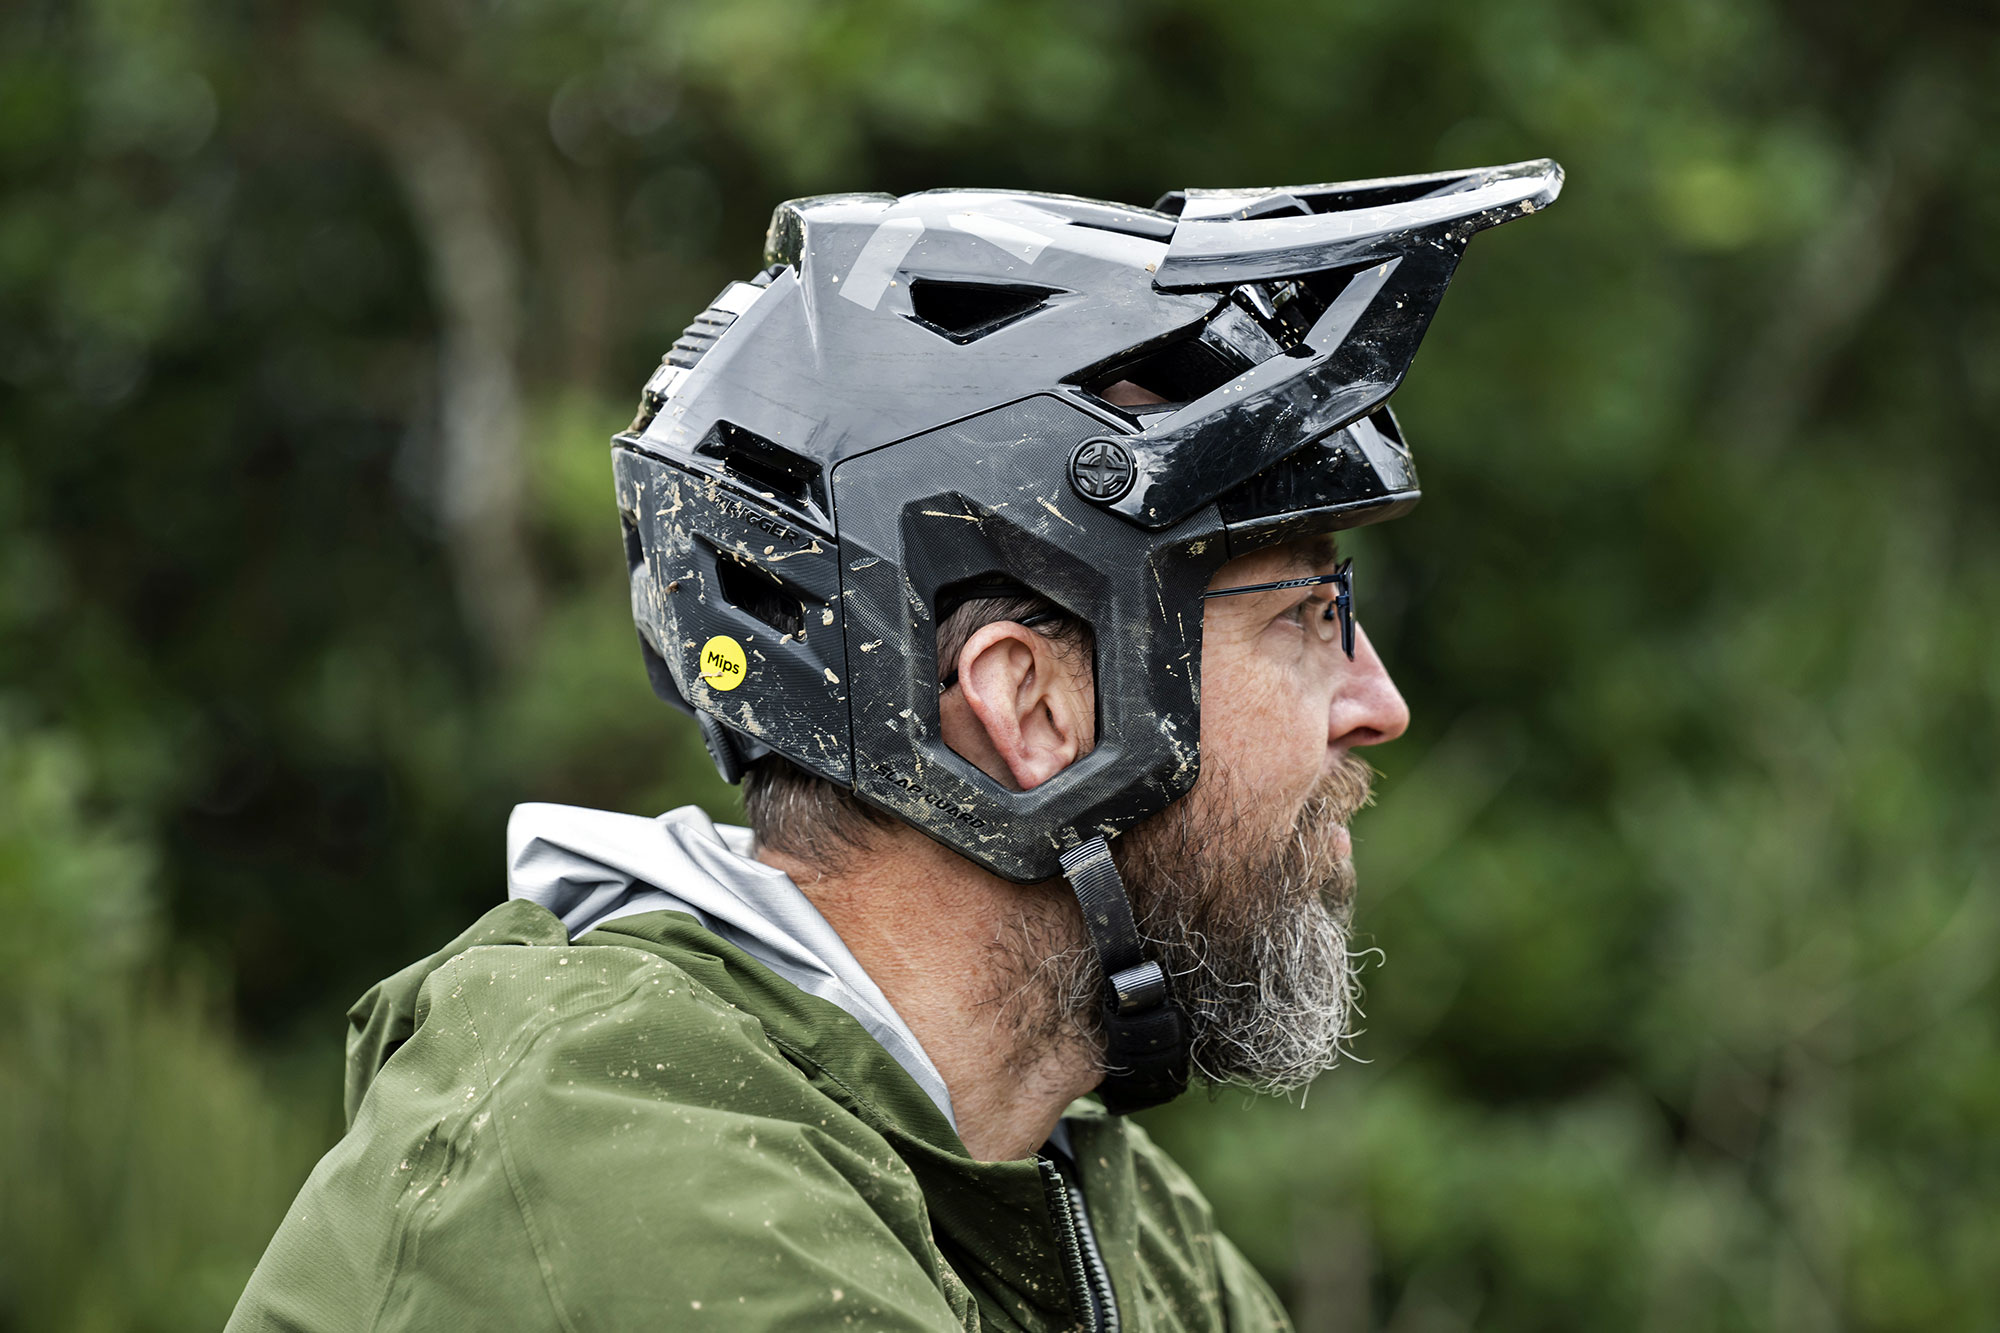 iXS Trigger X 3/4 Shell Enduro Helmet Offers Extra Protection with Max Ventilation: Review